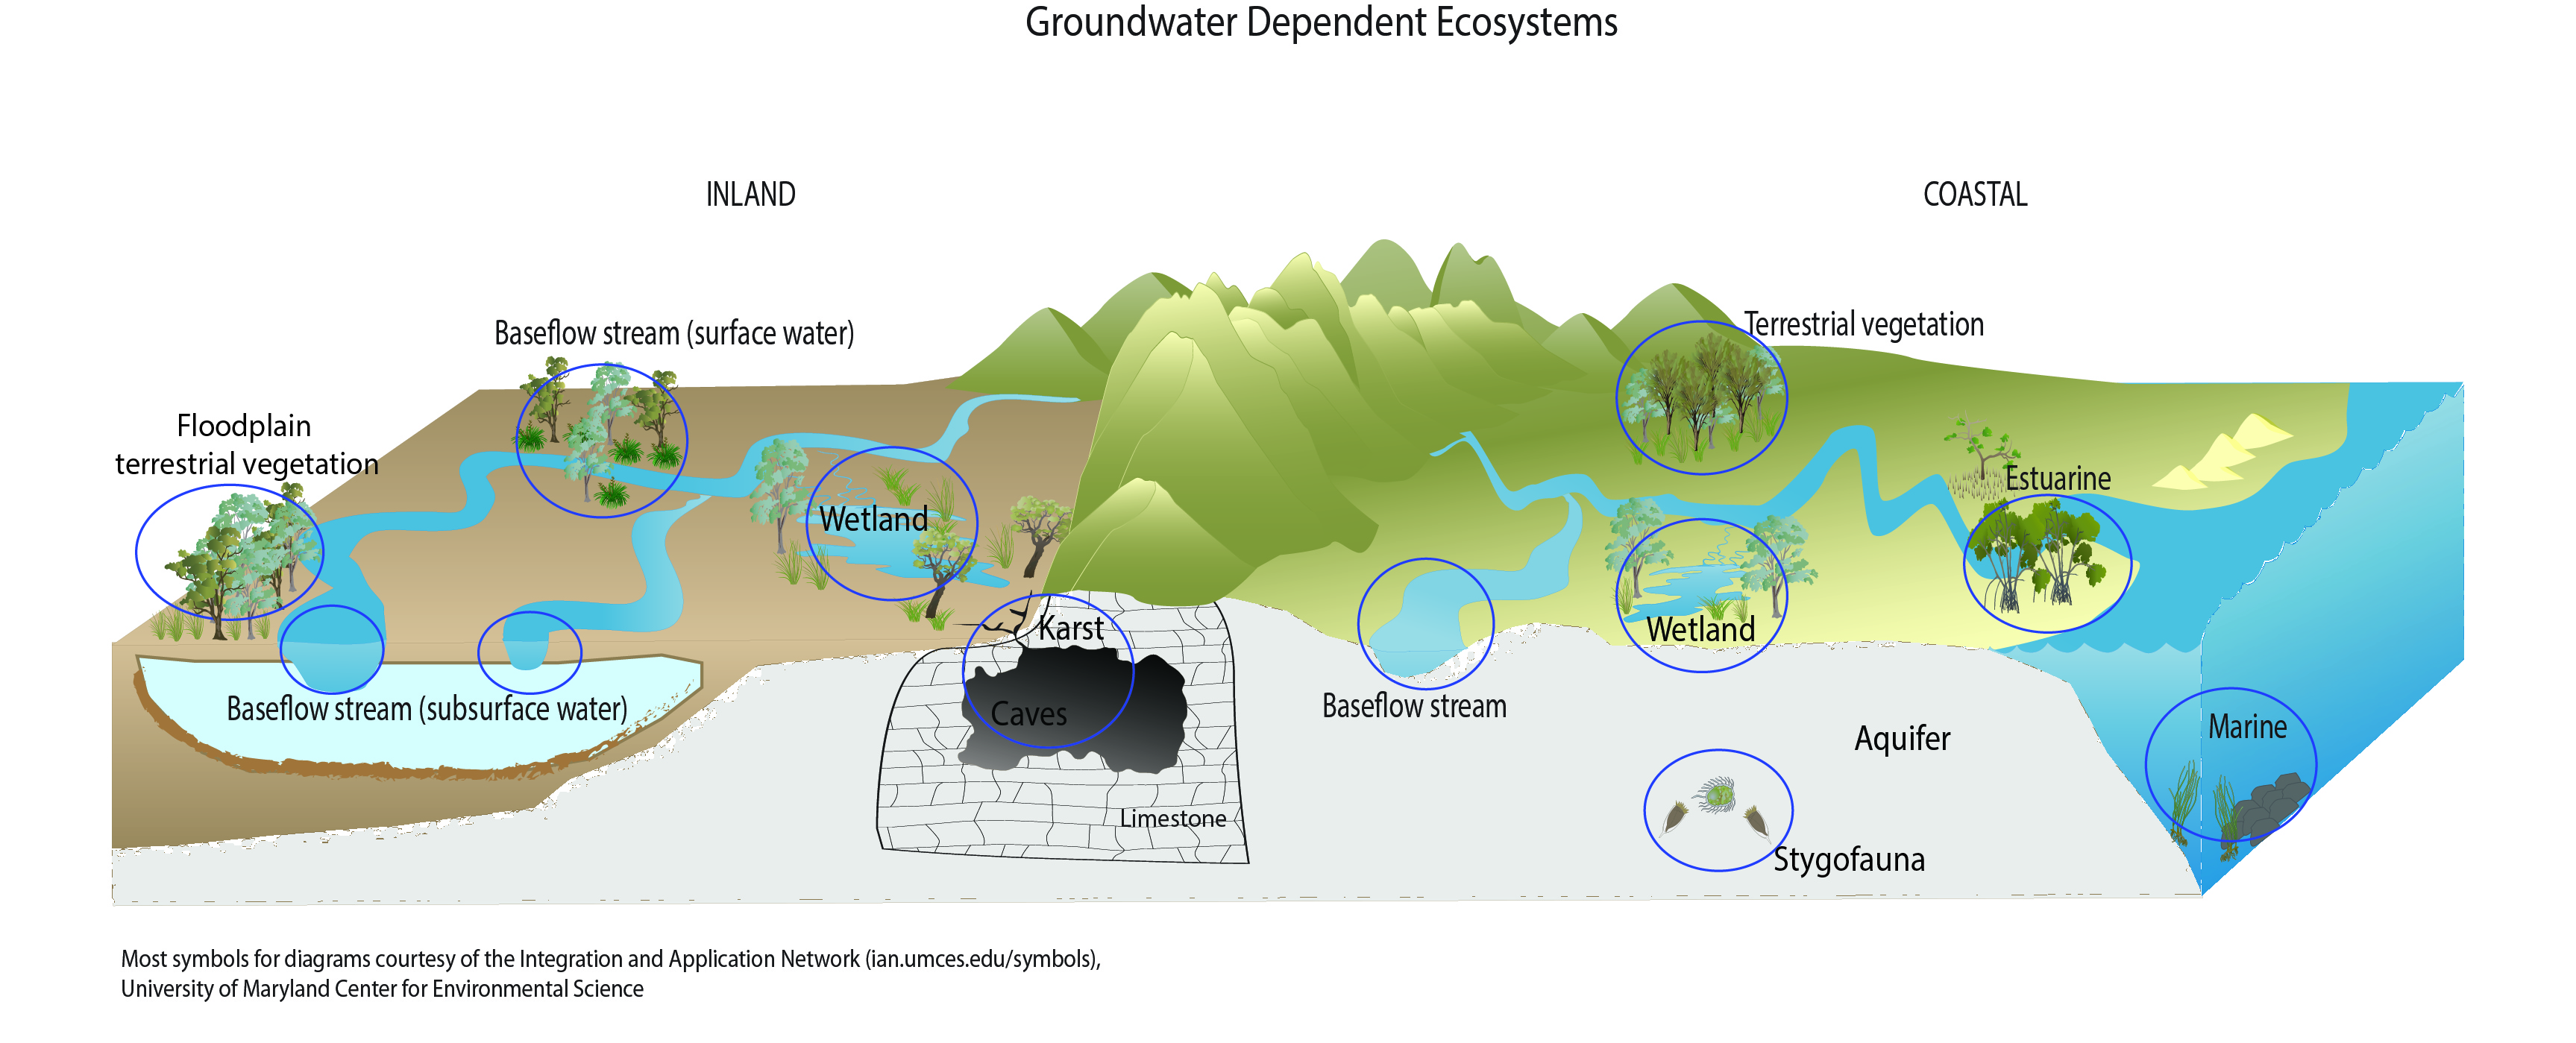 Groundwater Dependent Ecosystems